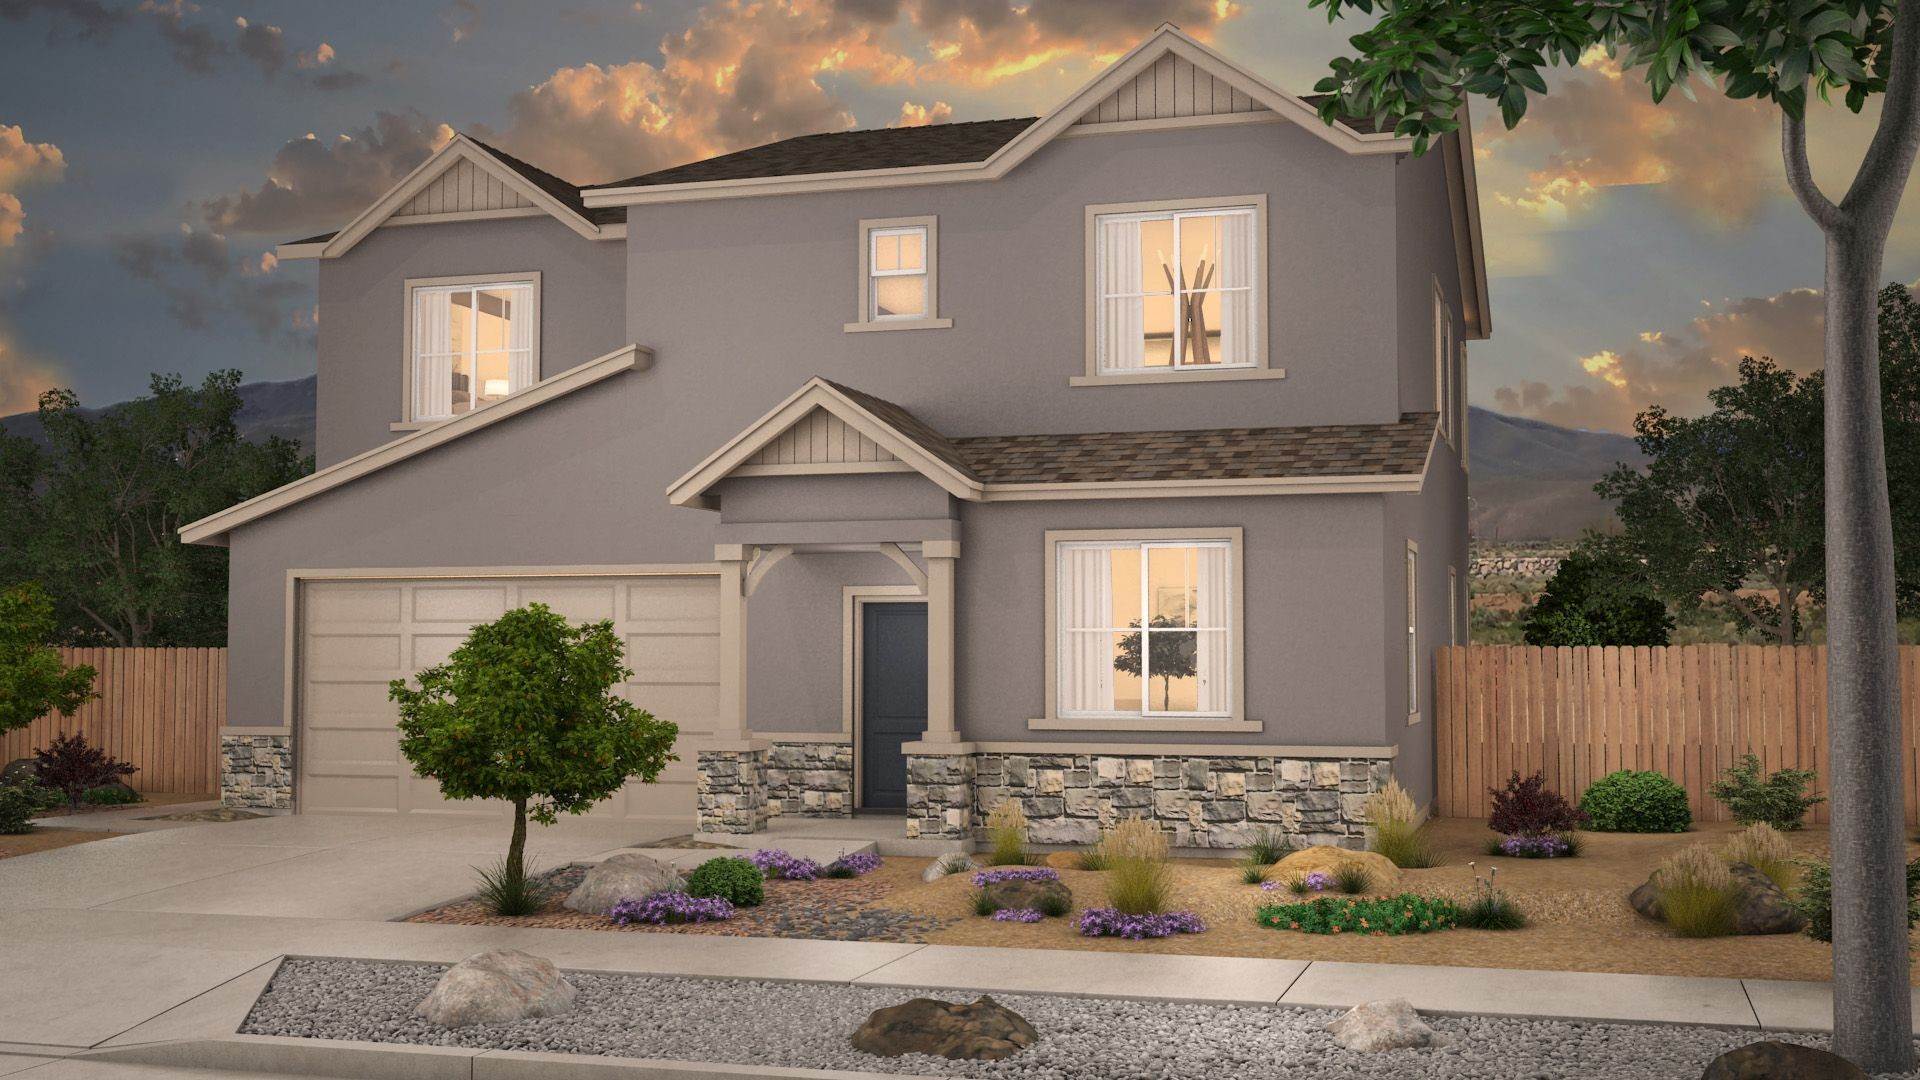 2. Multi Family for Active at Legacy Pointe - The Heritage 9351 Bay Drive RENO, NEVADA 89506 UNITED STATES